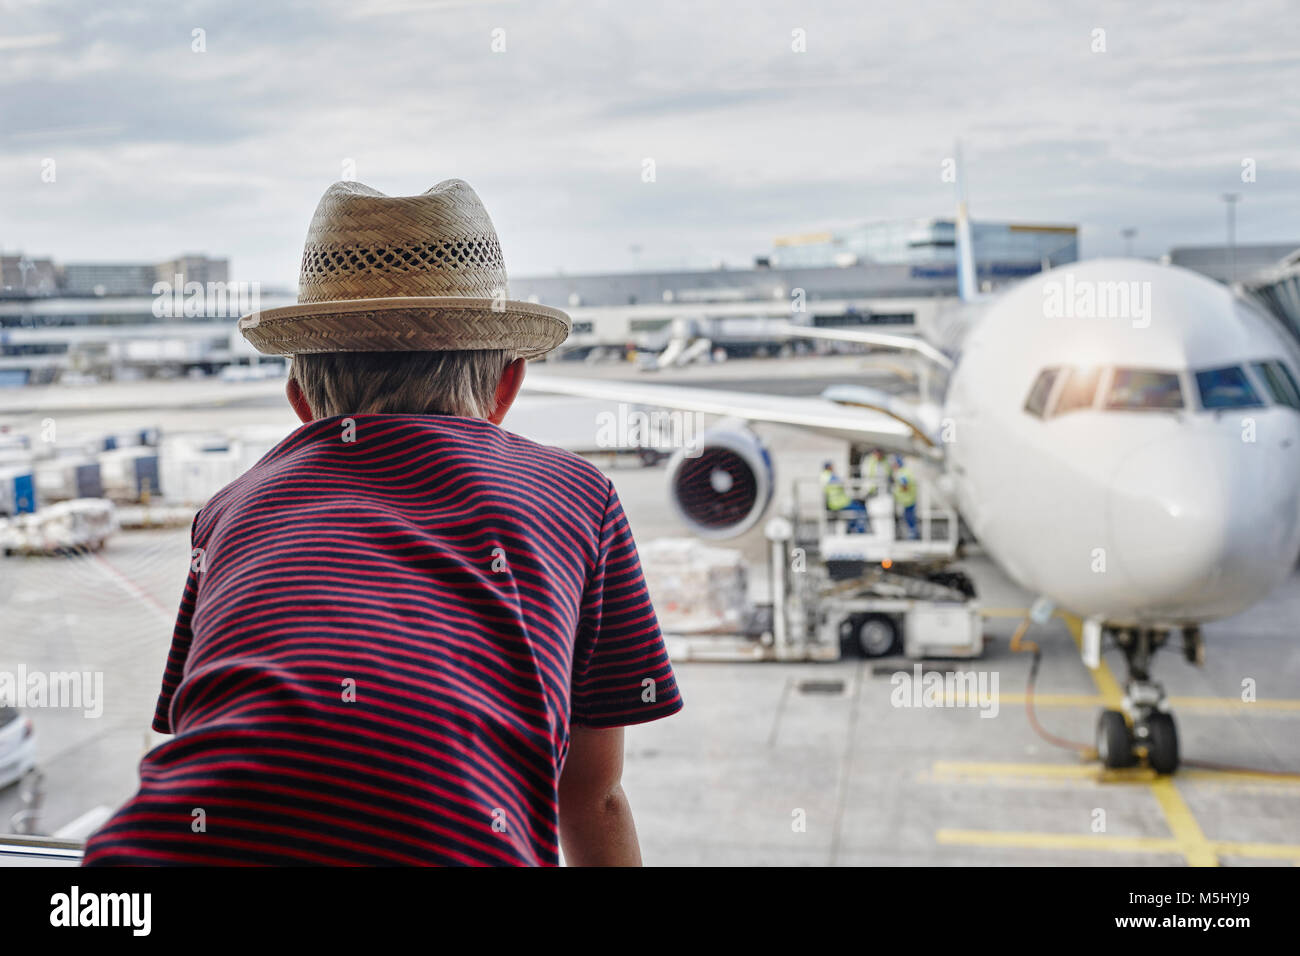 Boy wearing straw hat looking through window to airplane on the apron Stock Photo